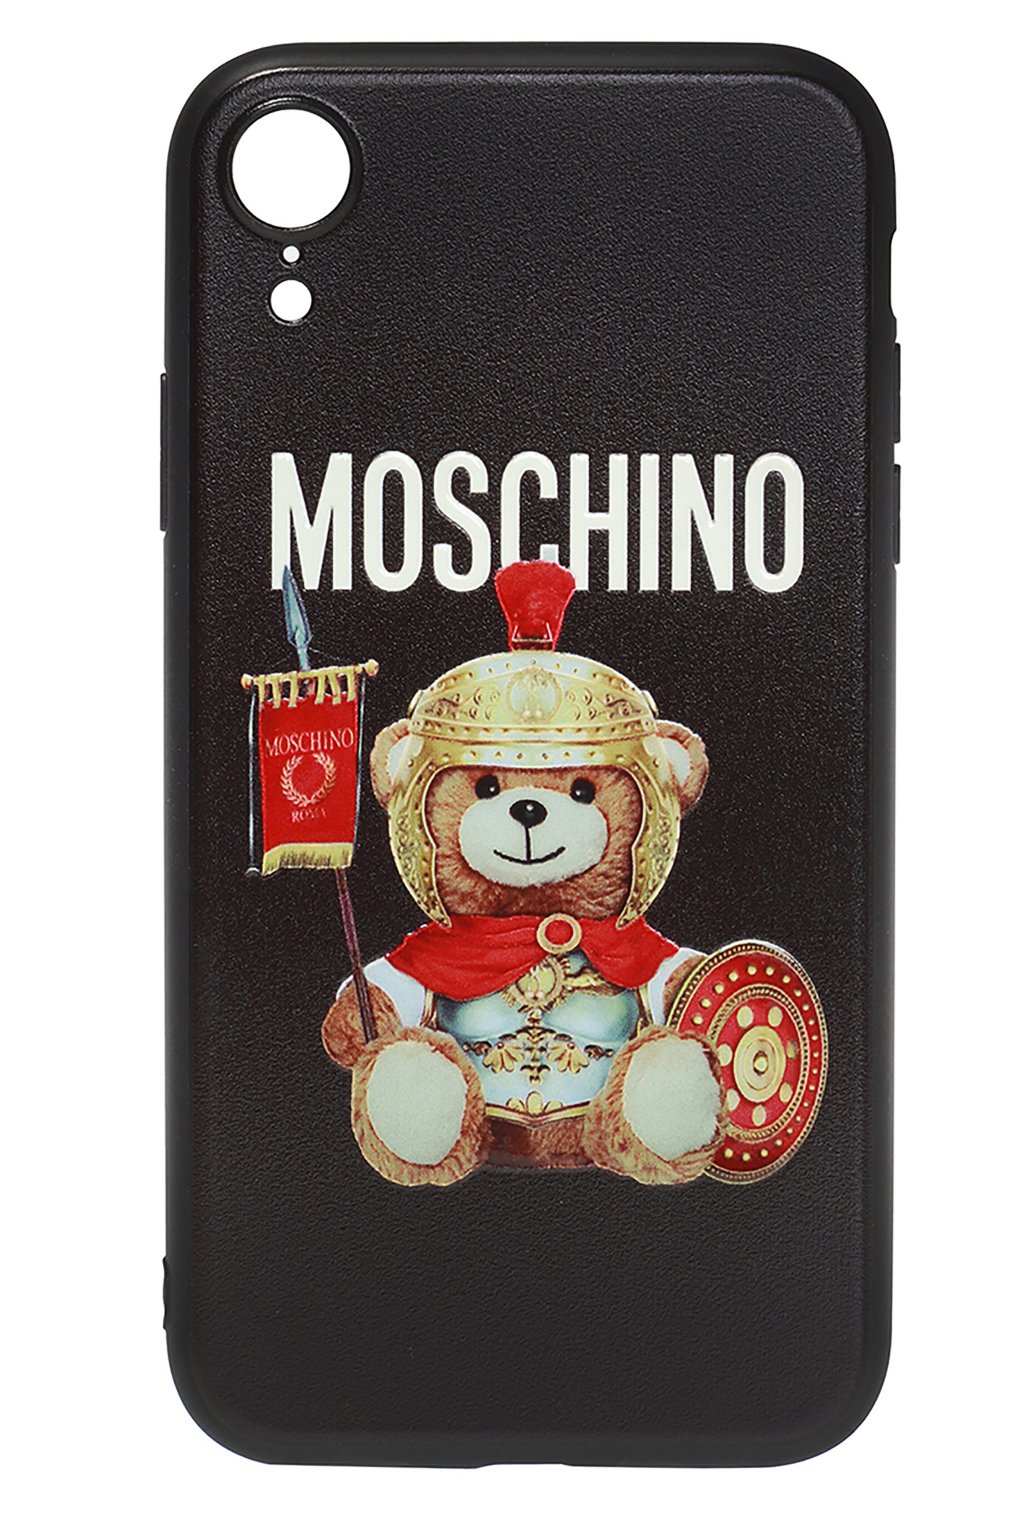 moschino case iphone xr